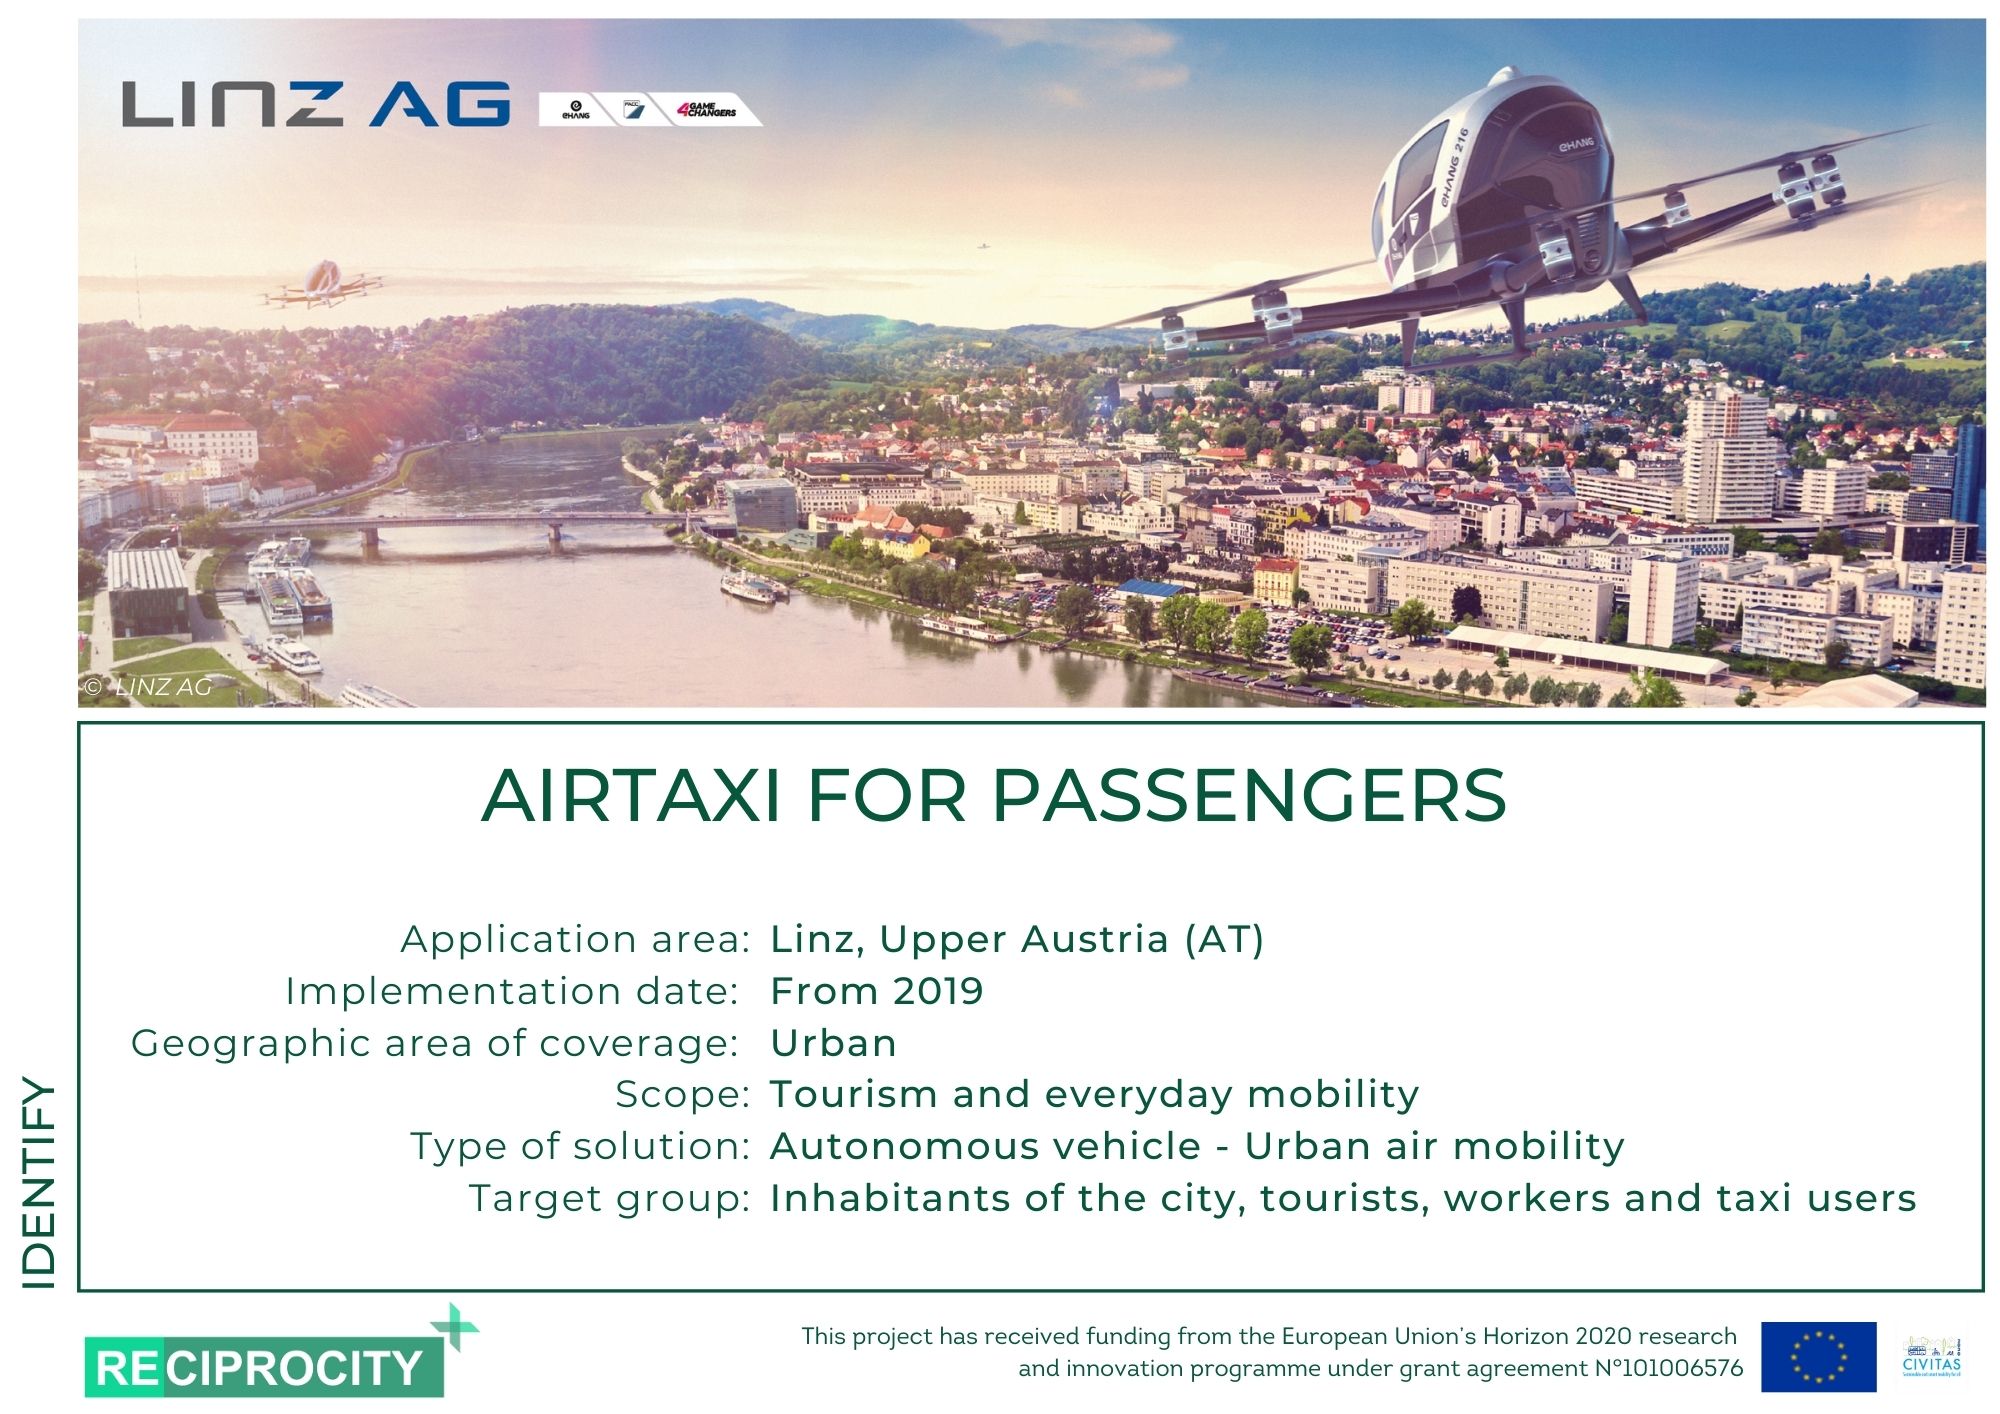 AIRTAXI FOR PASSENGERS